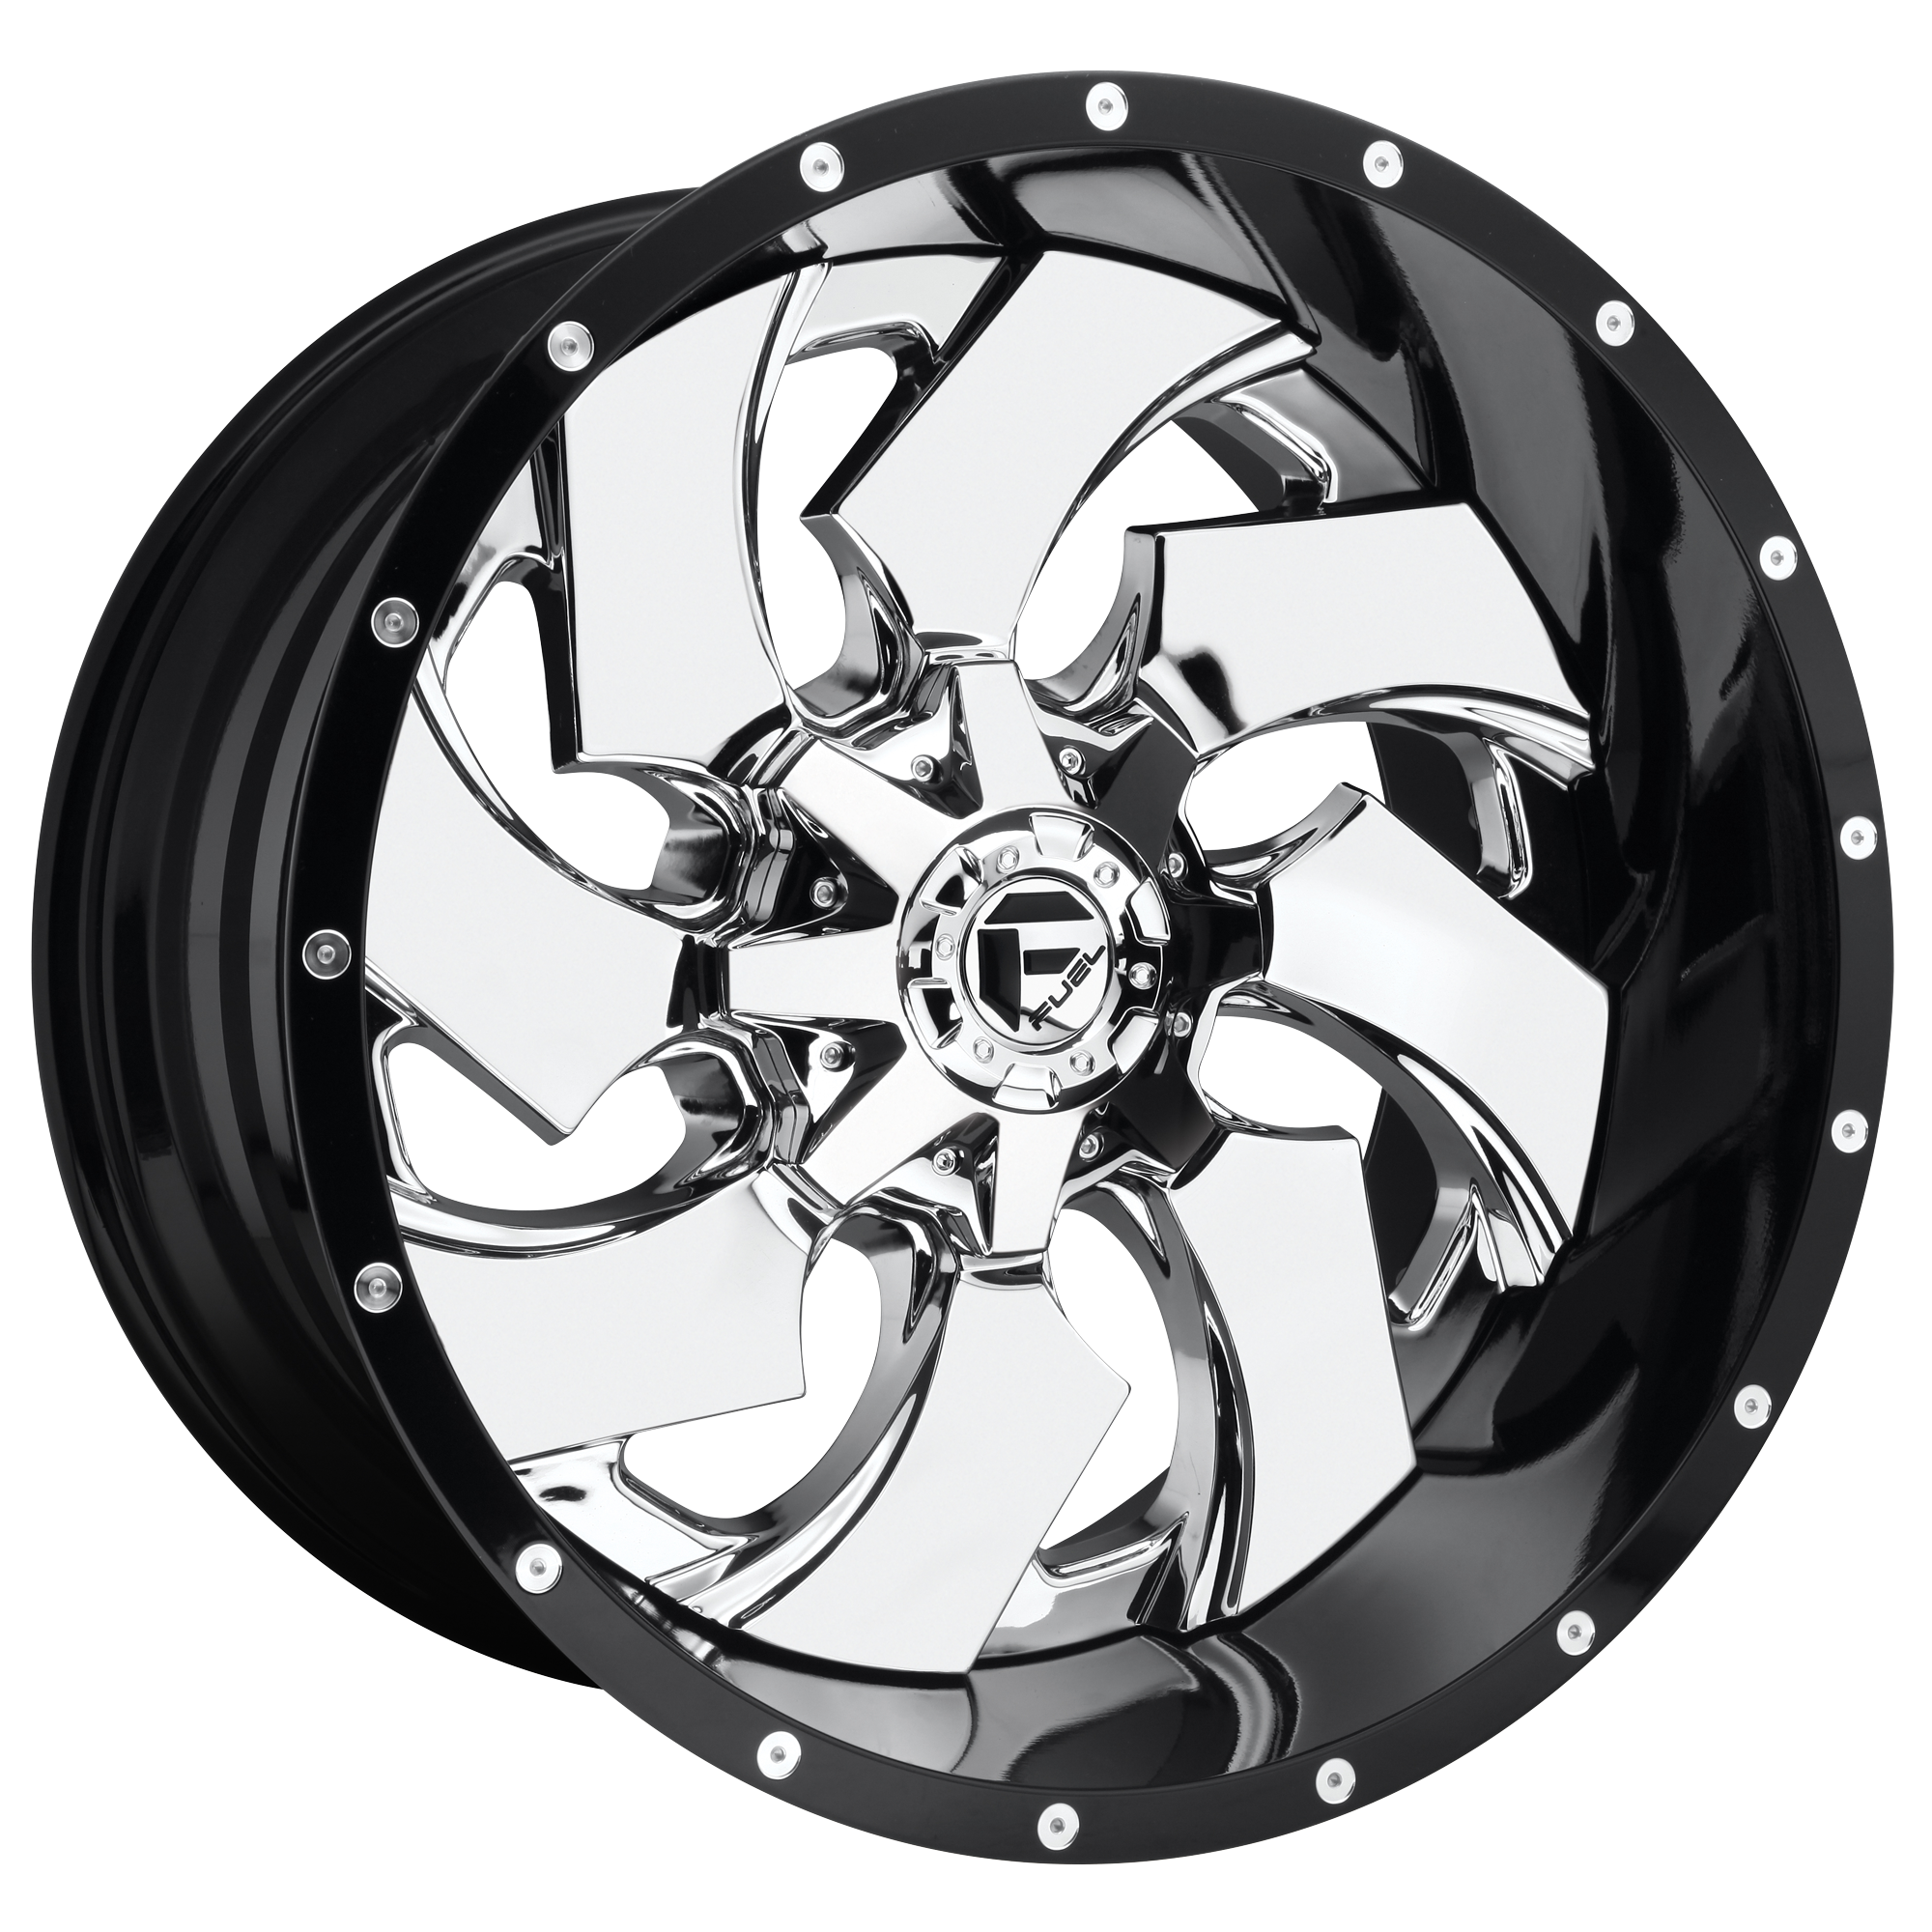 CLEAVER 20x10 6x135.00/6x139.70 CHROME PLATED GLOSS BLACK LIP (-19 mm) - Tires and Engine Performance